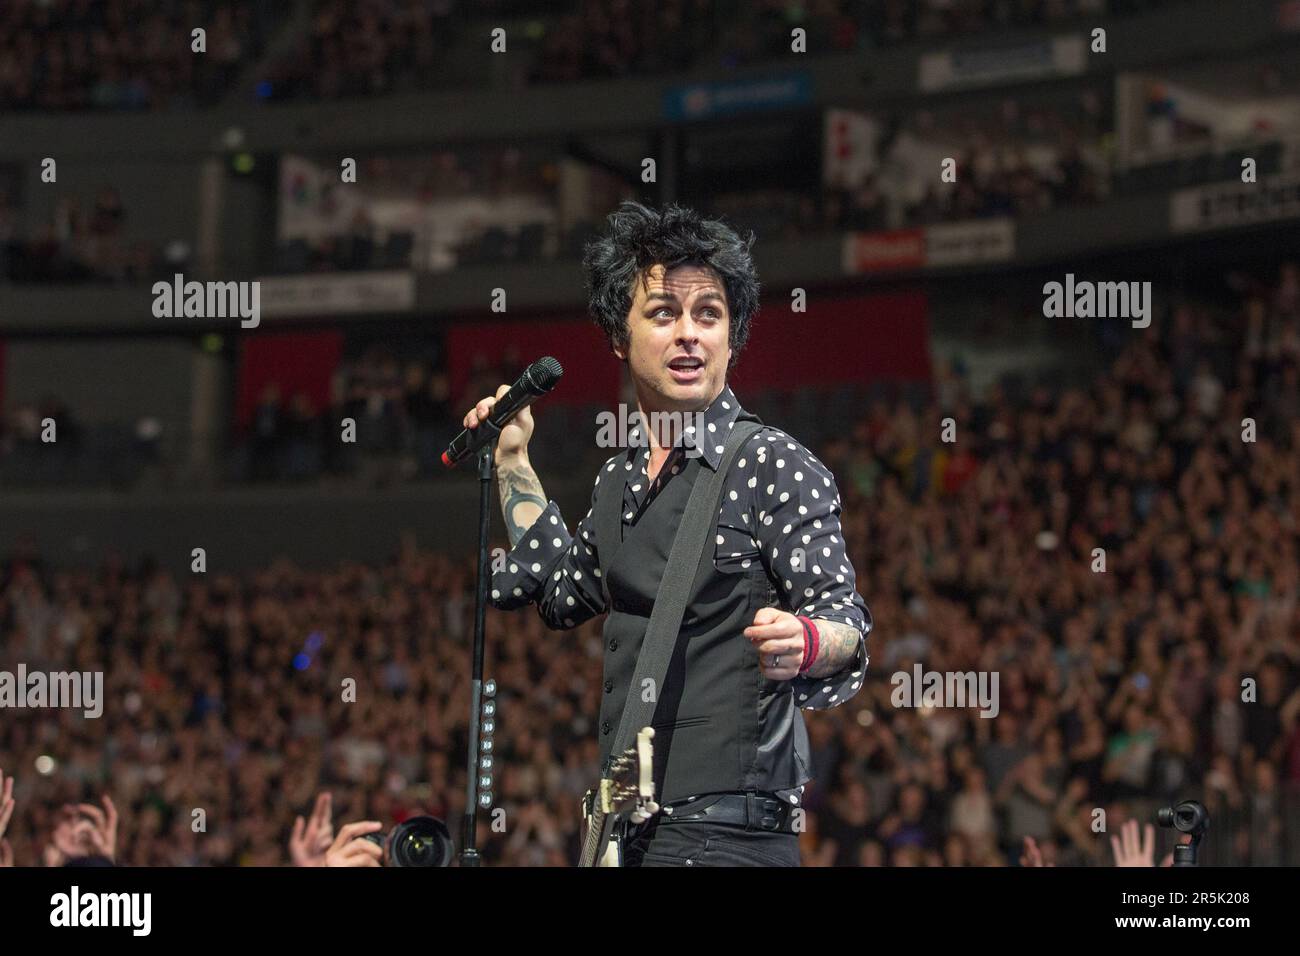 Cologne, Germany, 30.01.2017. Green Day perform live as part of their Revolution Radio Tour at the Lanxess Arena, Cologne Stock Photo